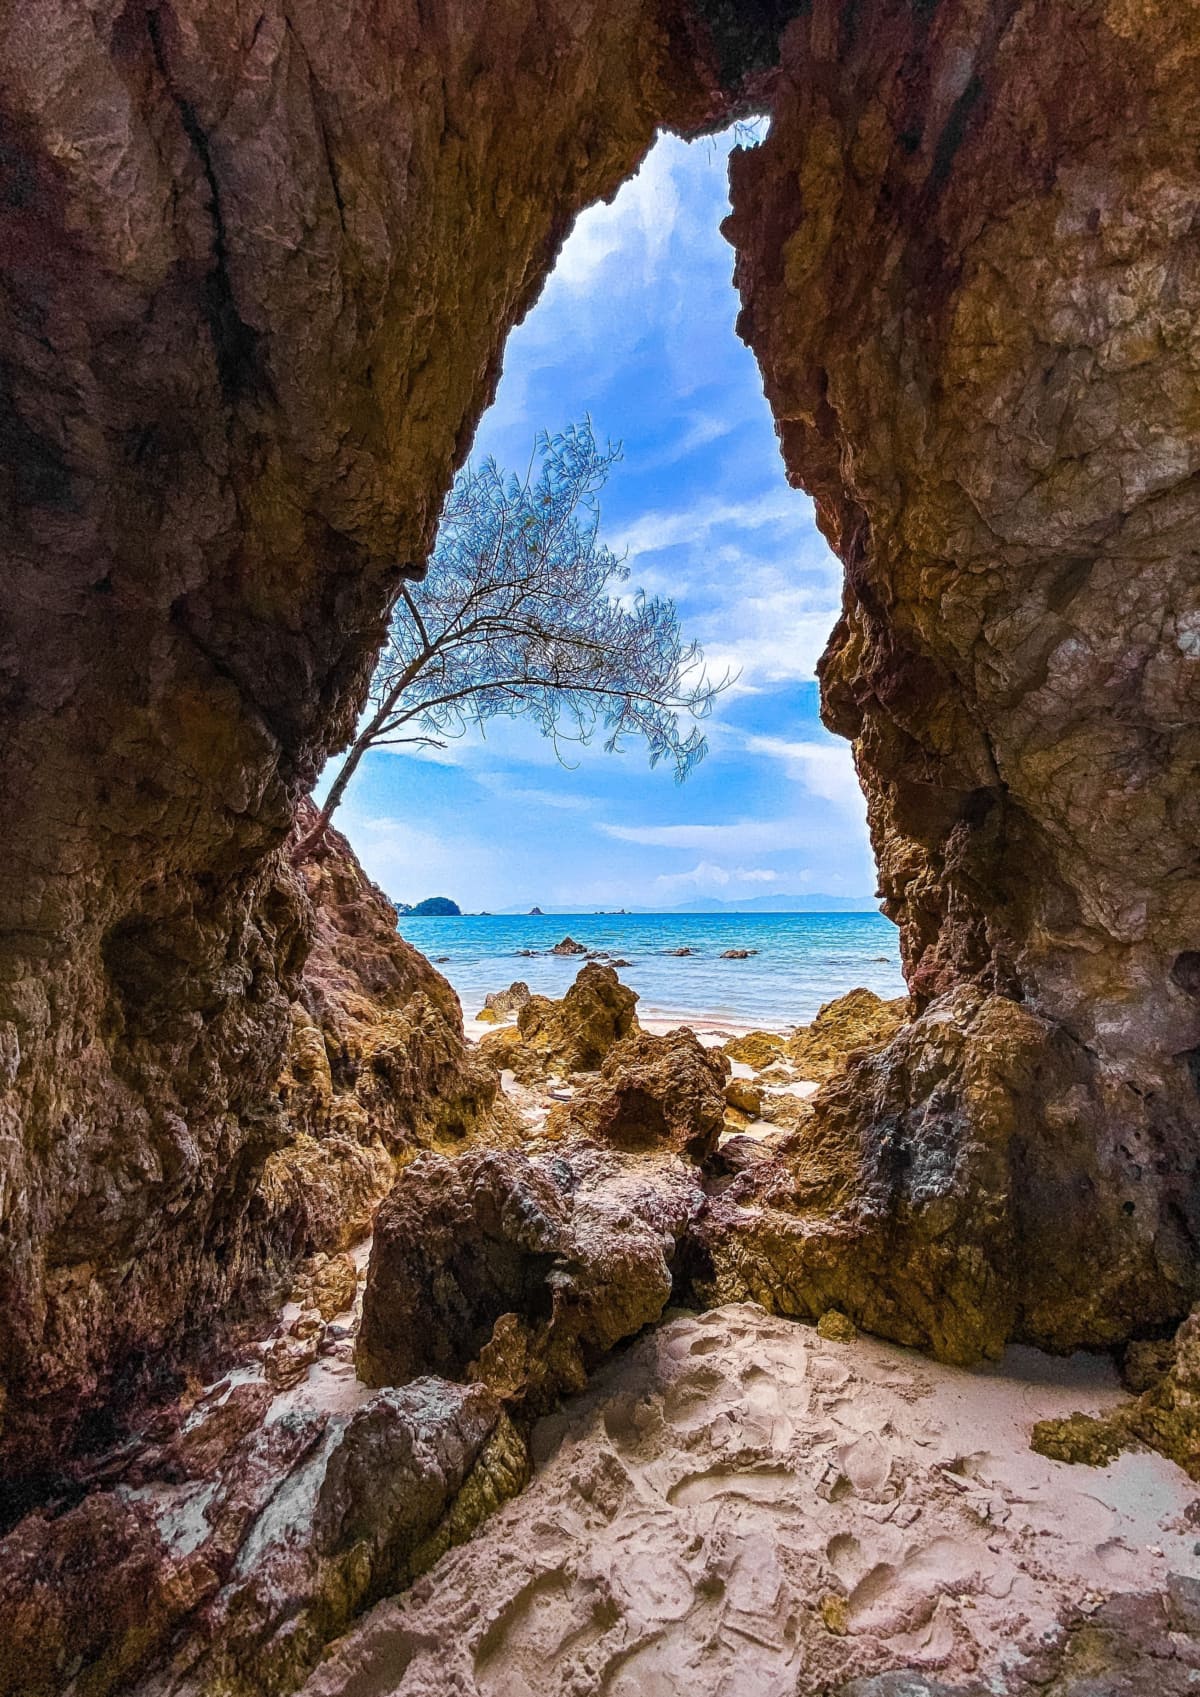 Koh Phayam beach with rock arch formation in Ranong, Thailand